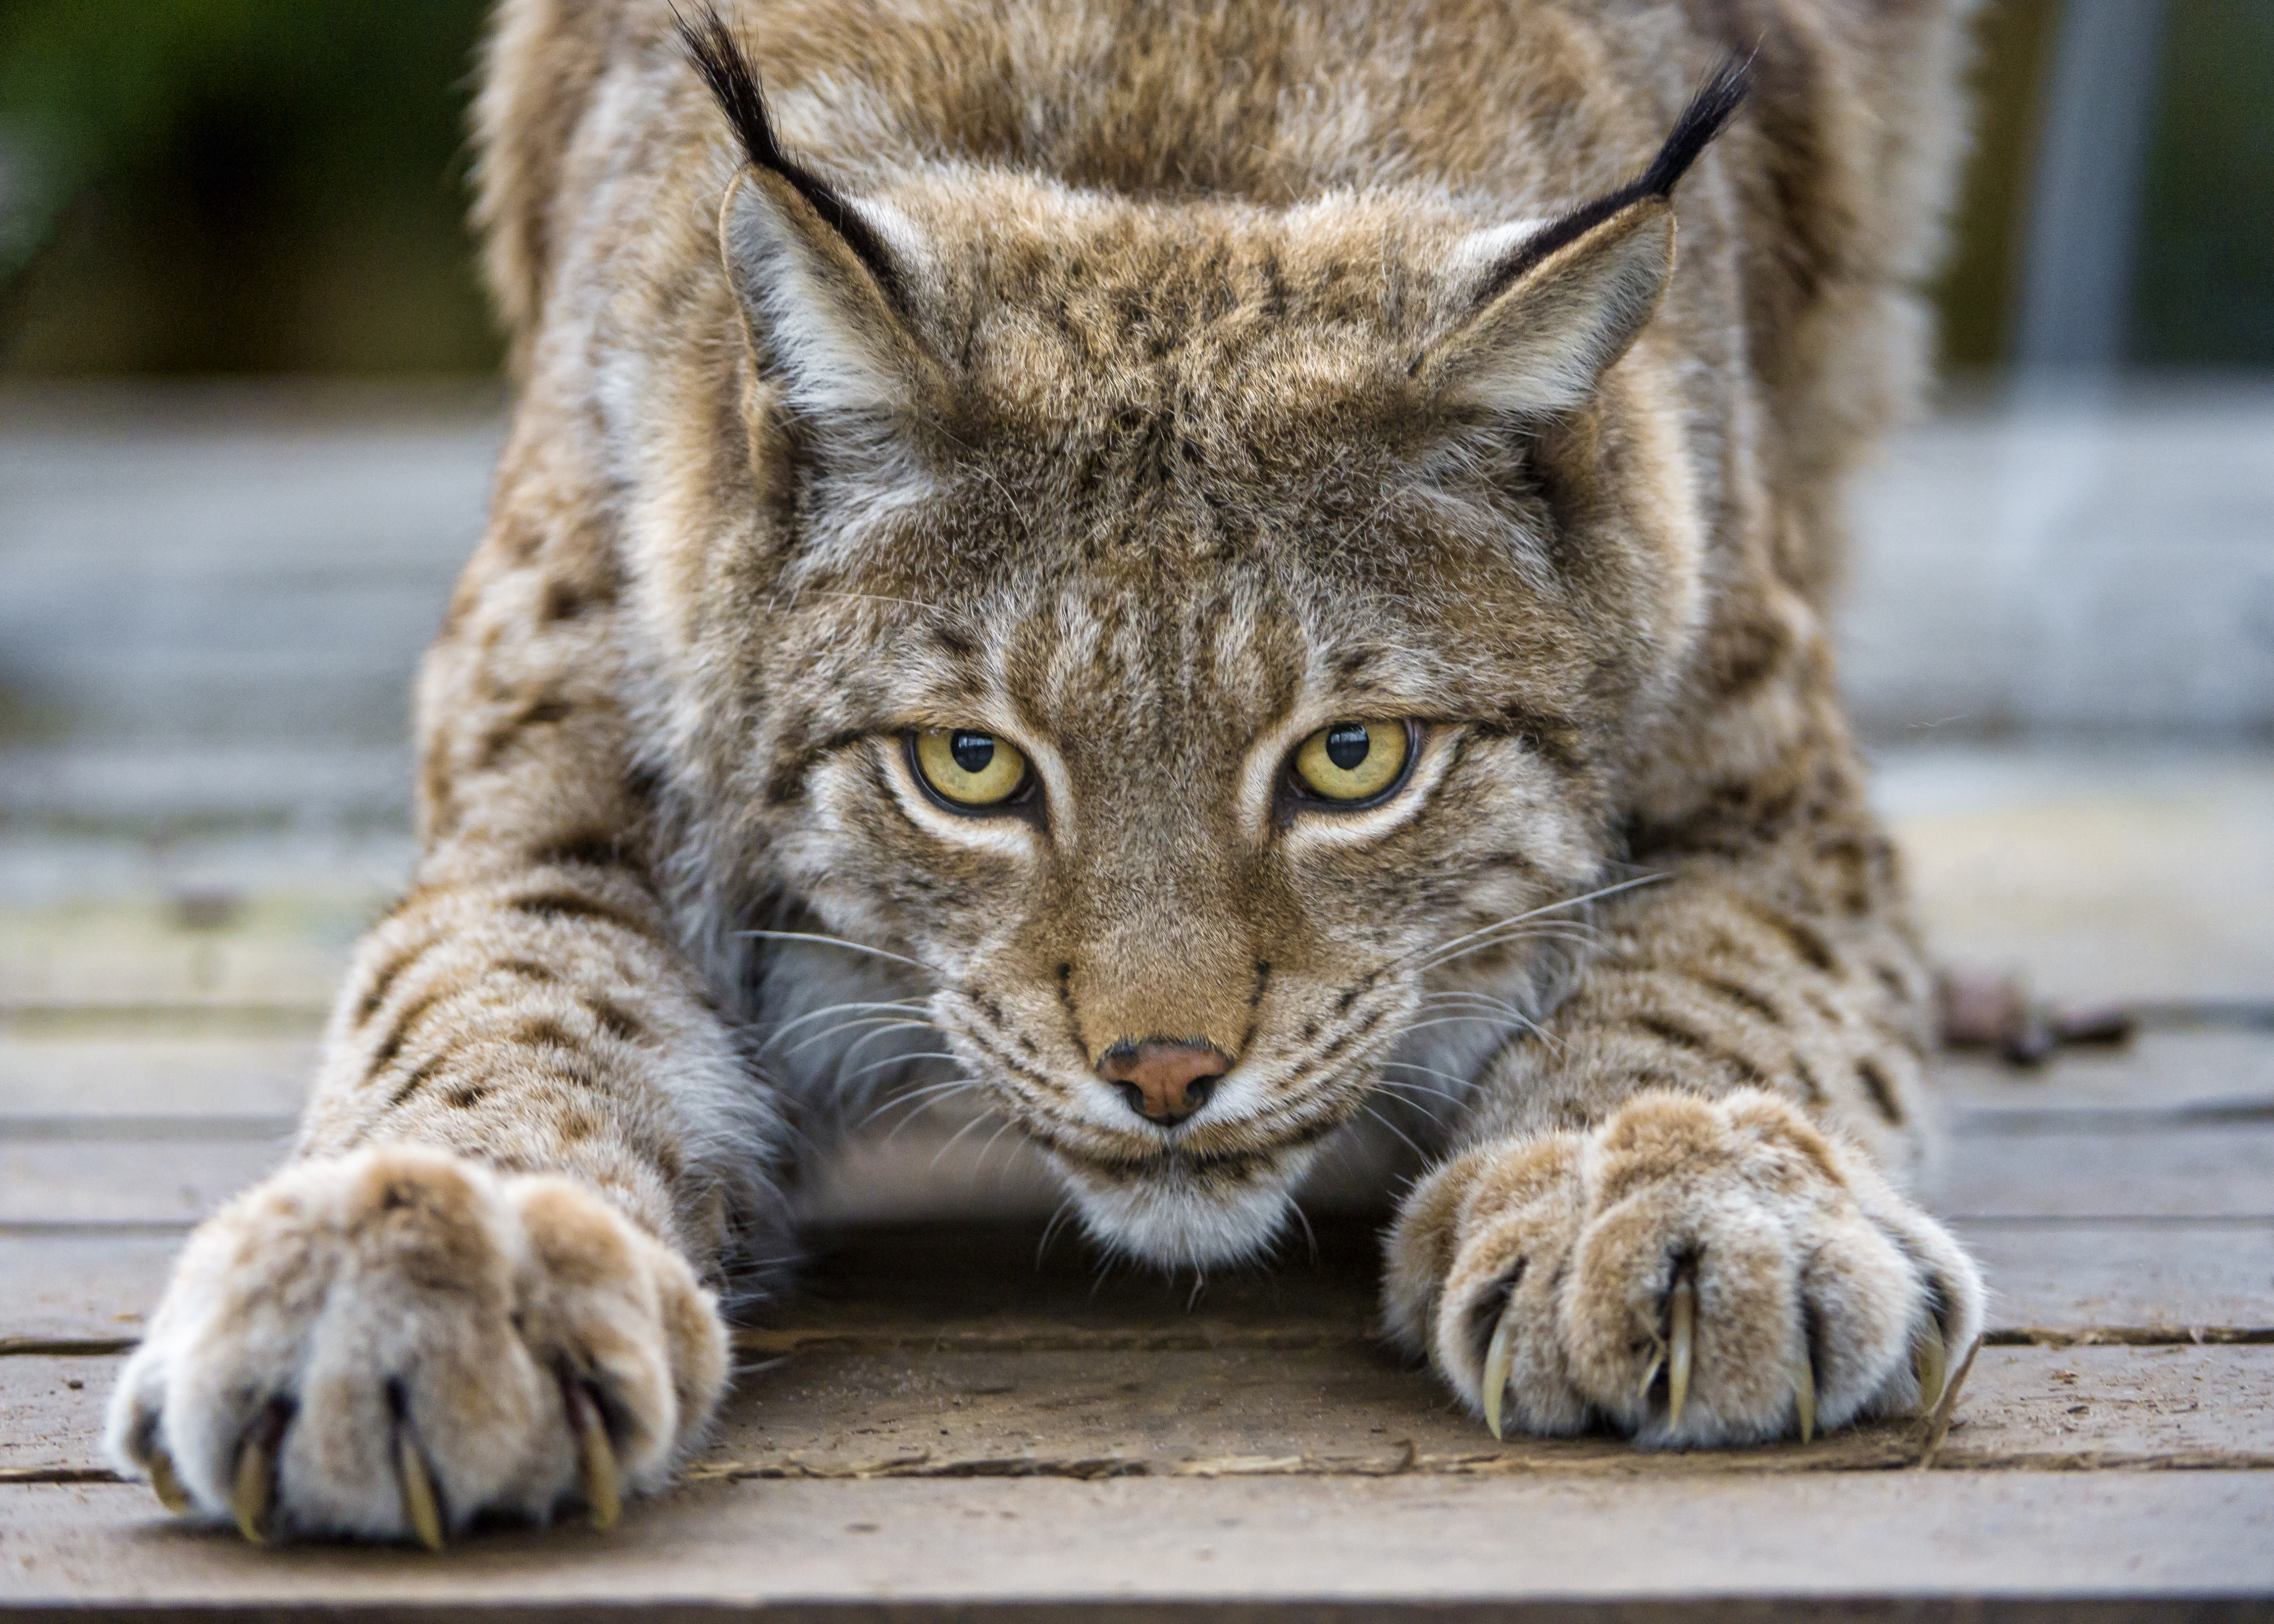 Wallpapers animals nature lynx on the desktop